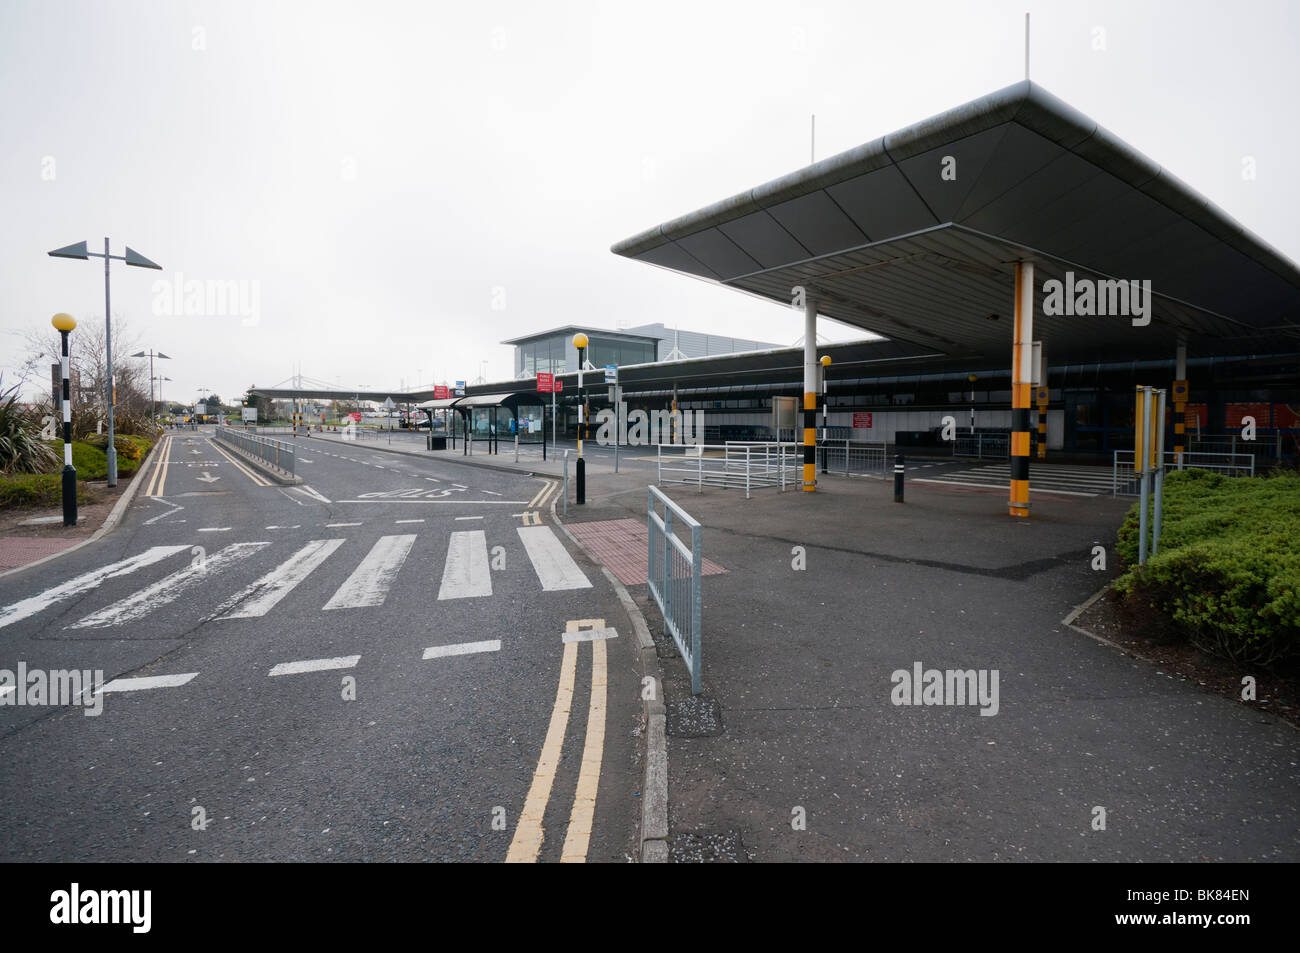 Outside of Belfast International Airport in 2010, after changes were